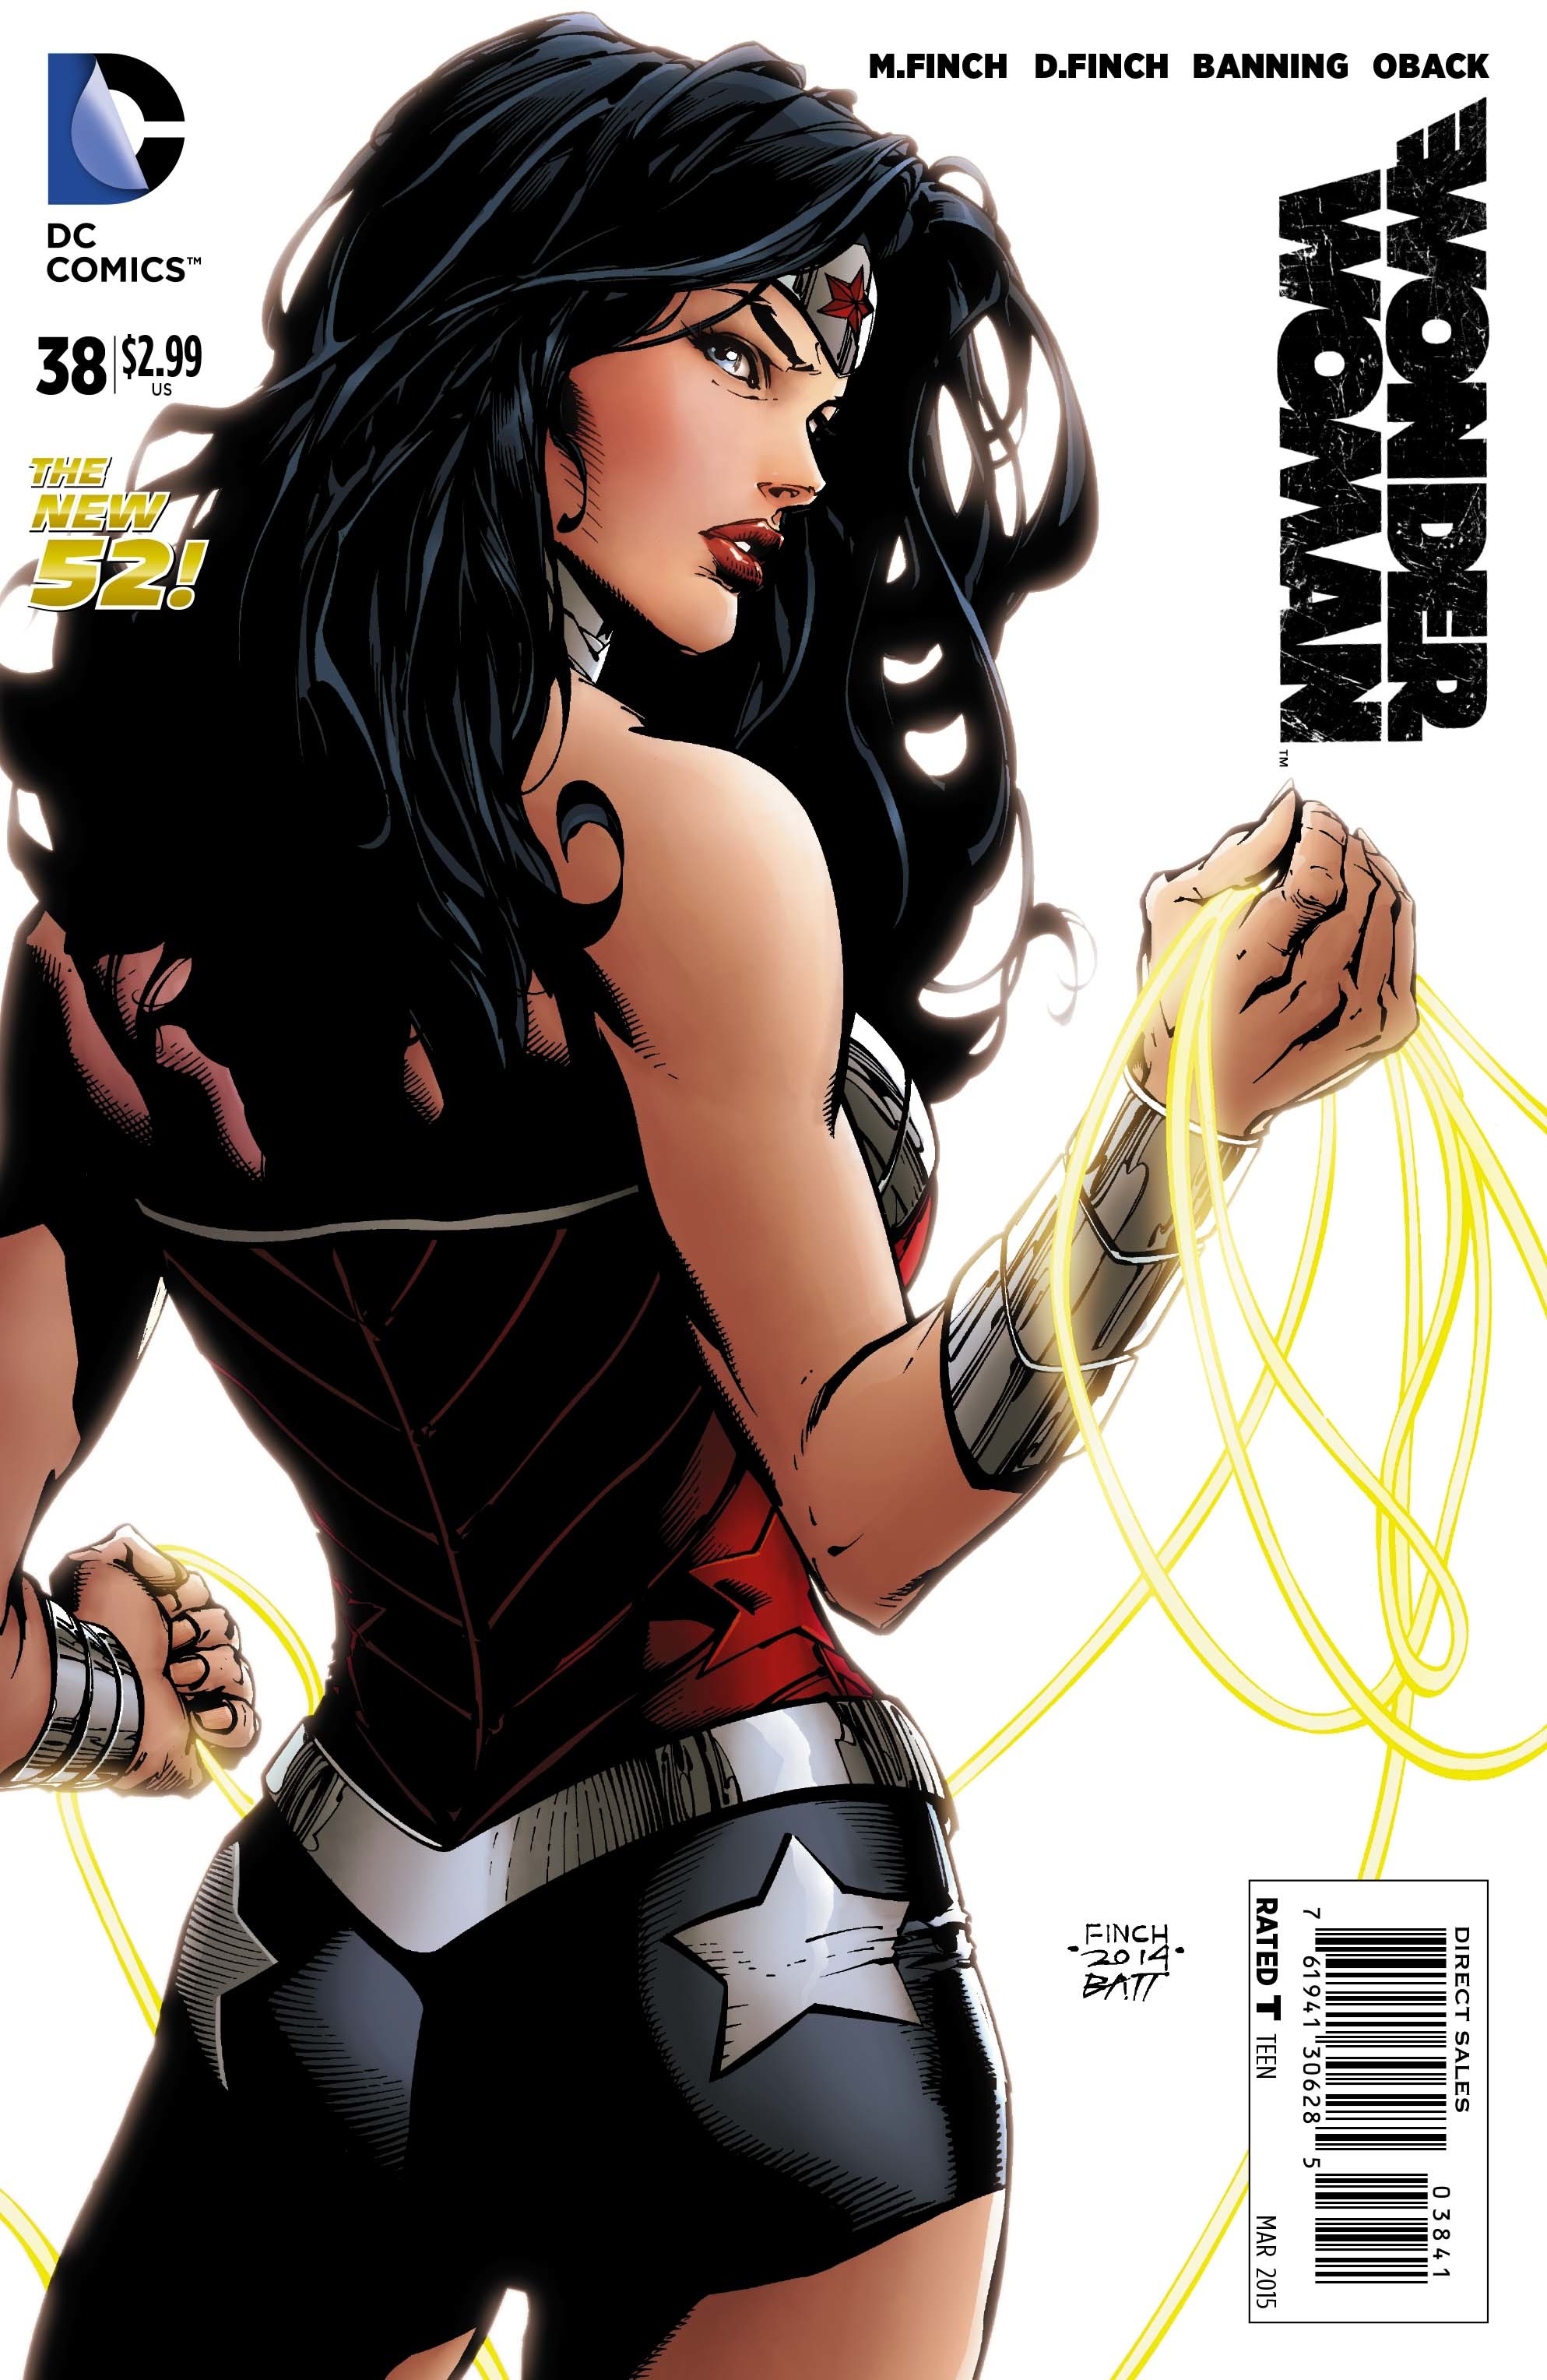 1987x3056 Variant cover to Wonder Woman #38 (2015), art by David Finch,